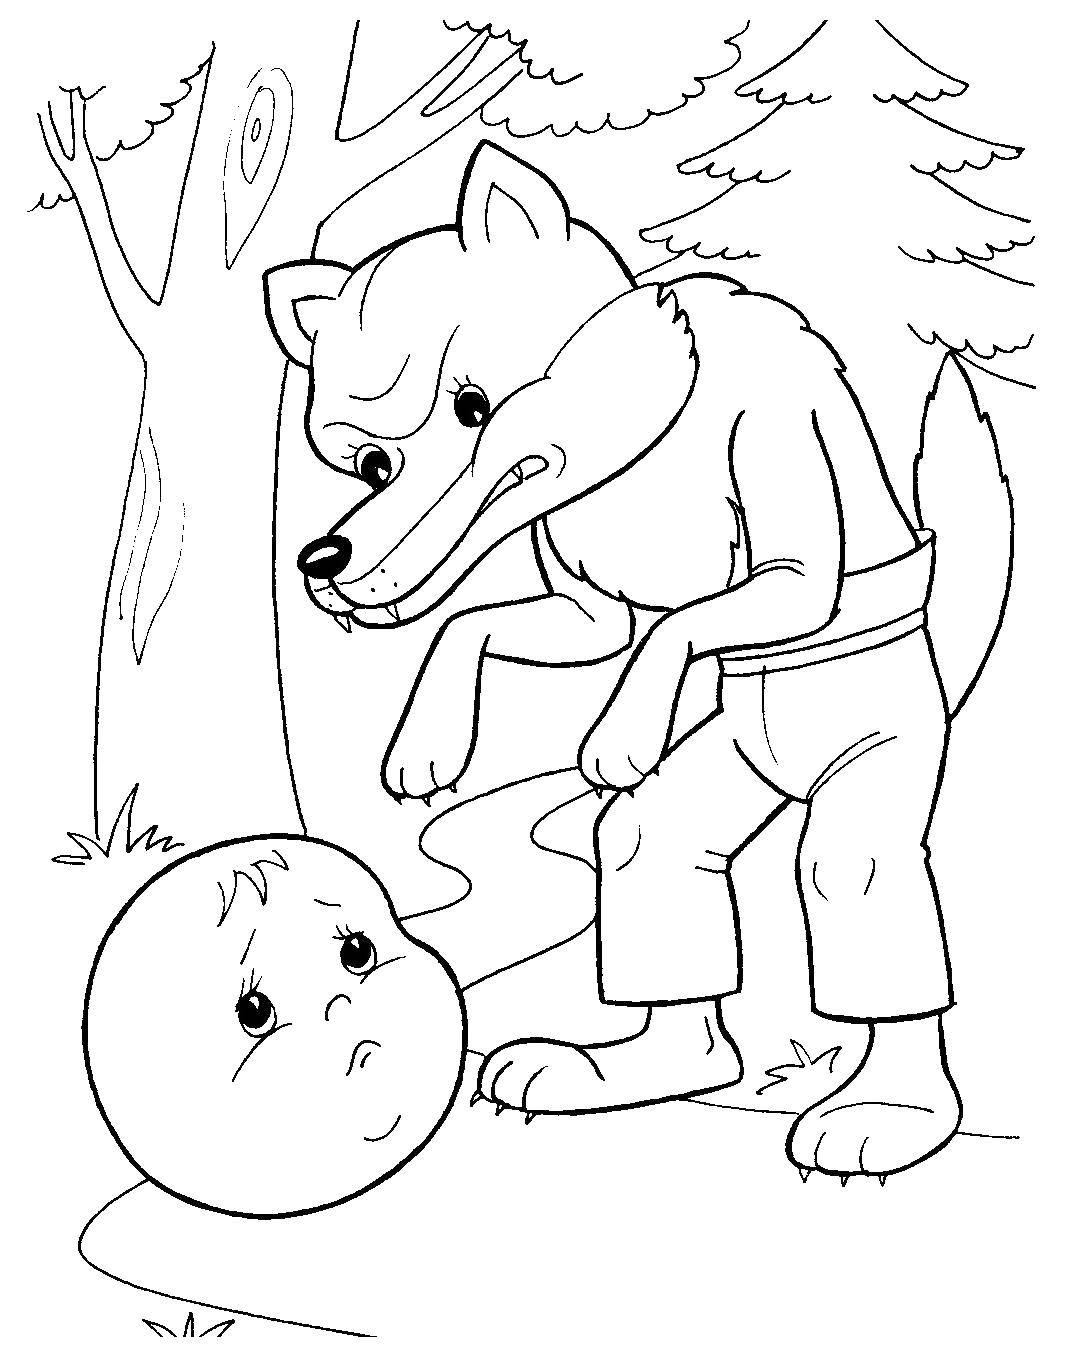 Coloring The bun and the grey wolf. Category Fairy tales. Tags:  gingerbread man , wolf.